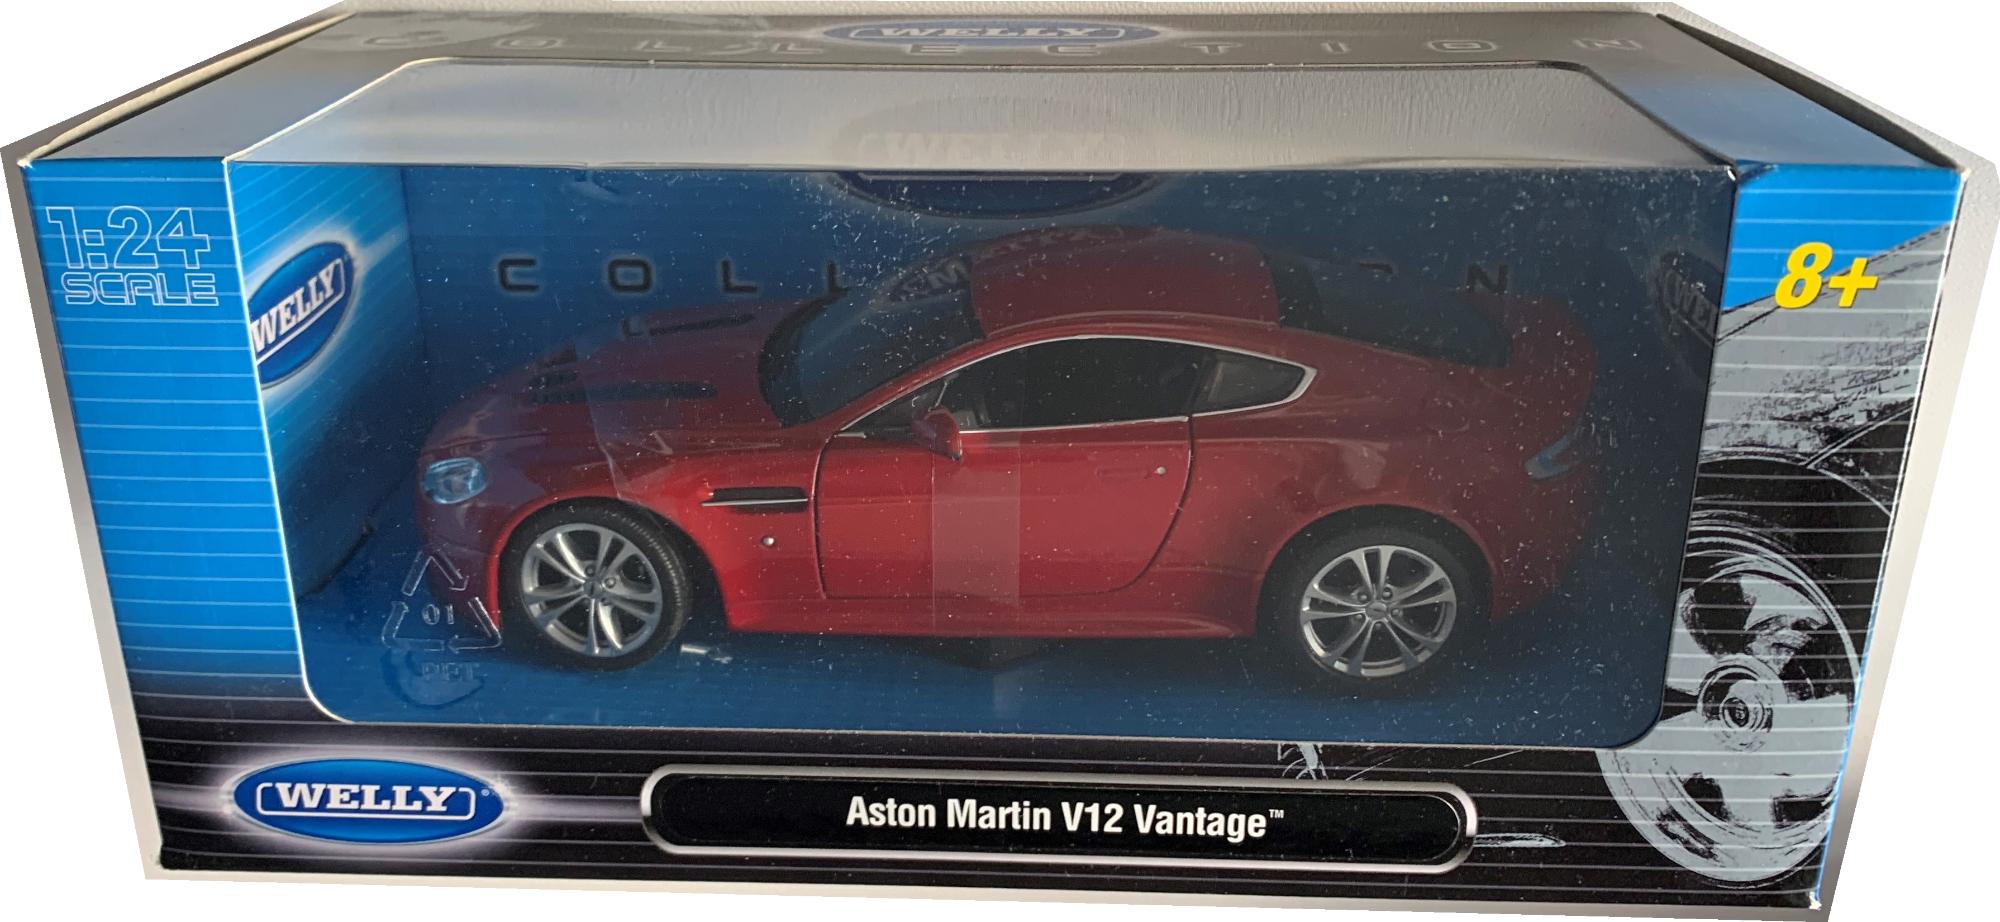 Aston Martin V12 Vantage in red 1:24 scale diecast model from Welly